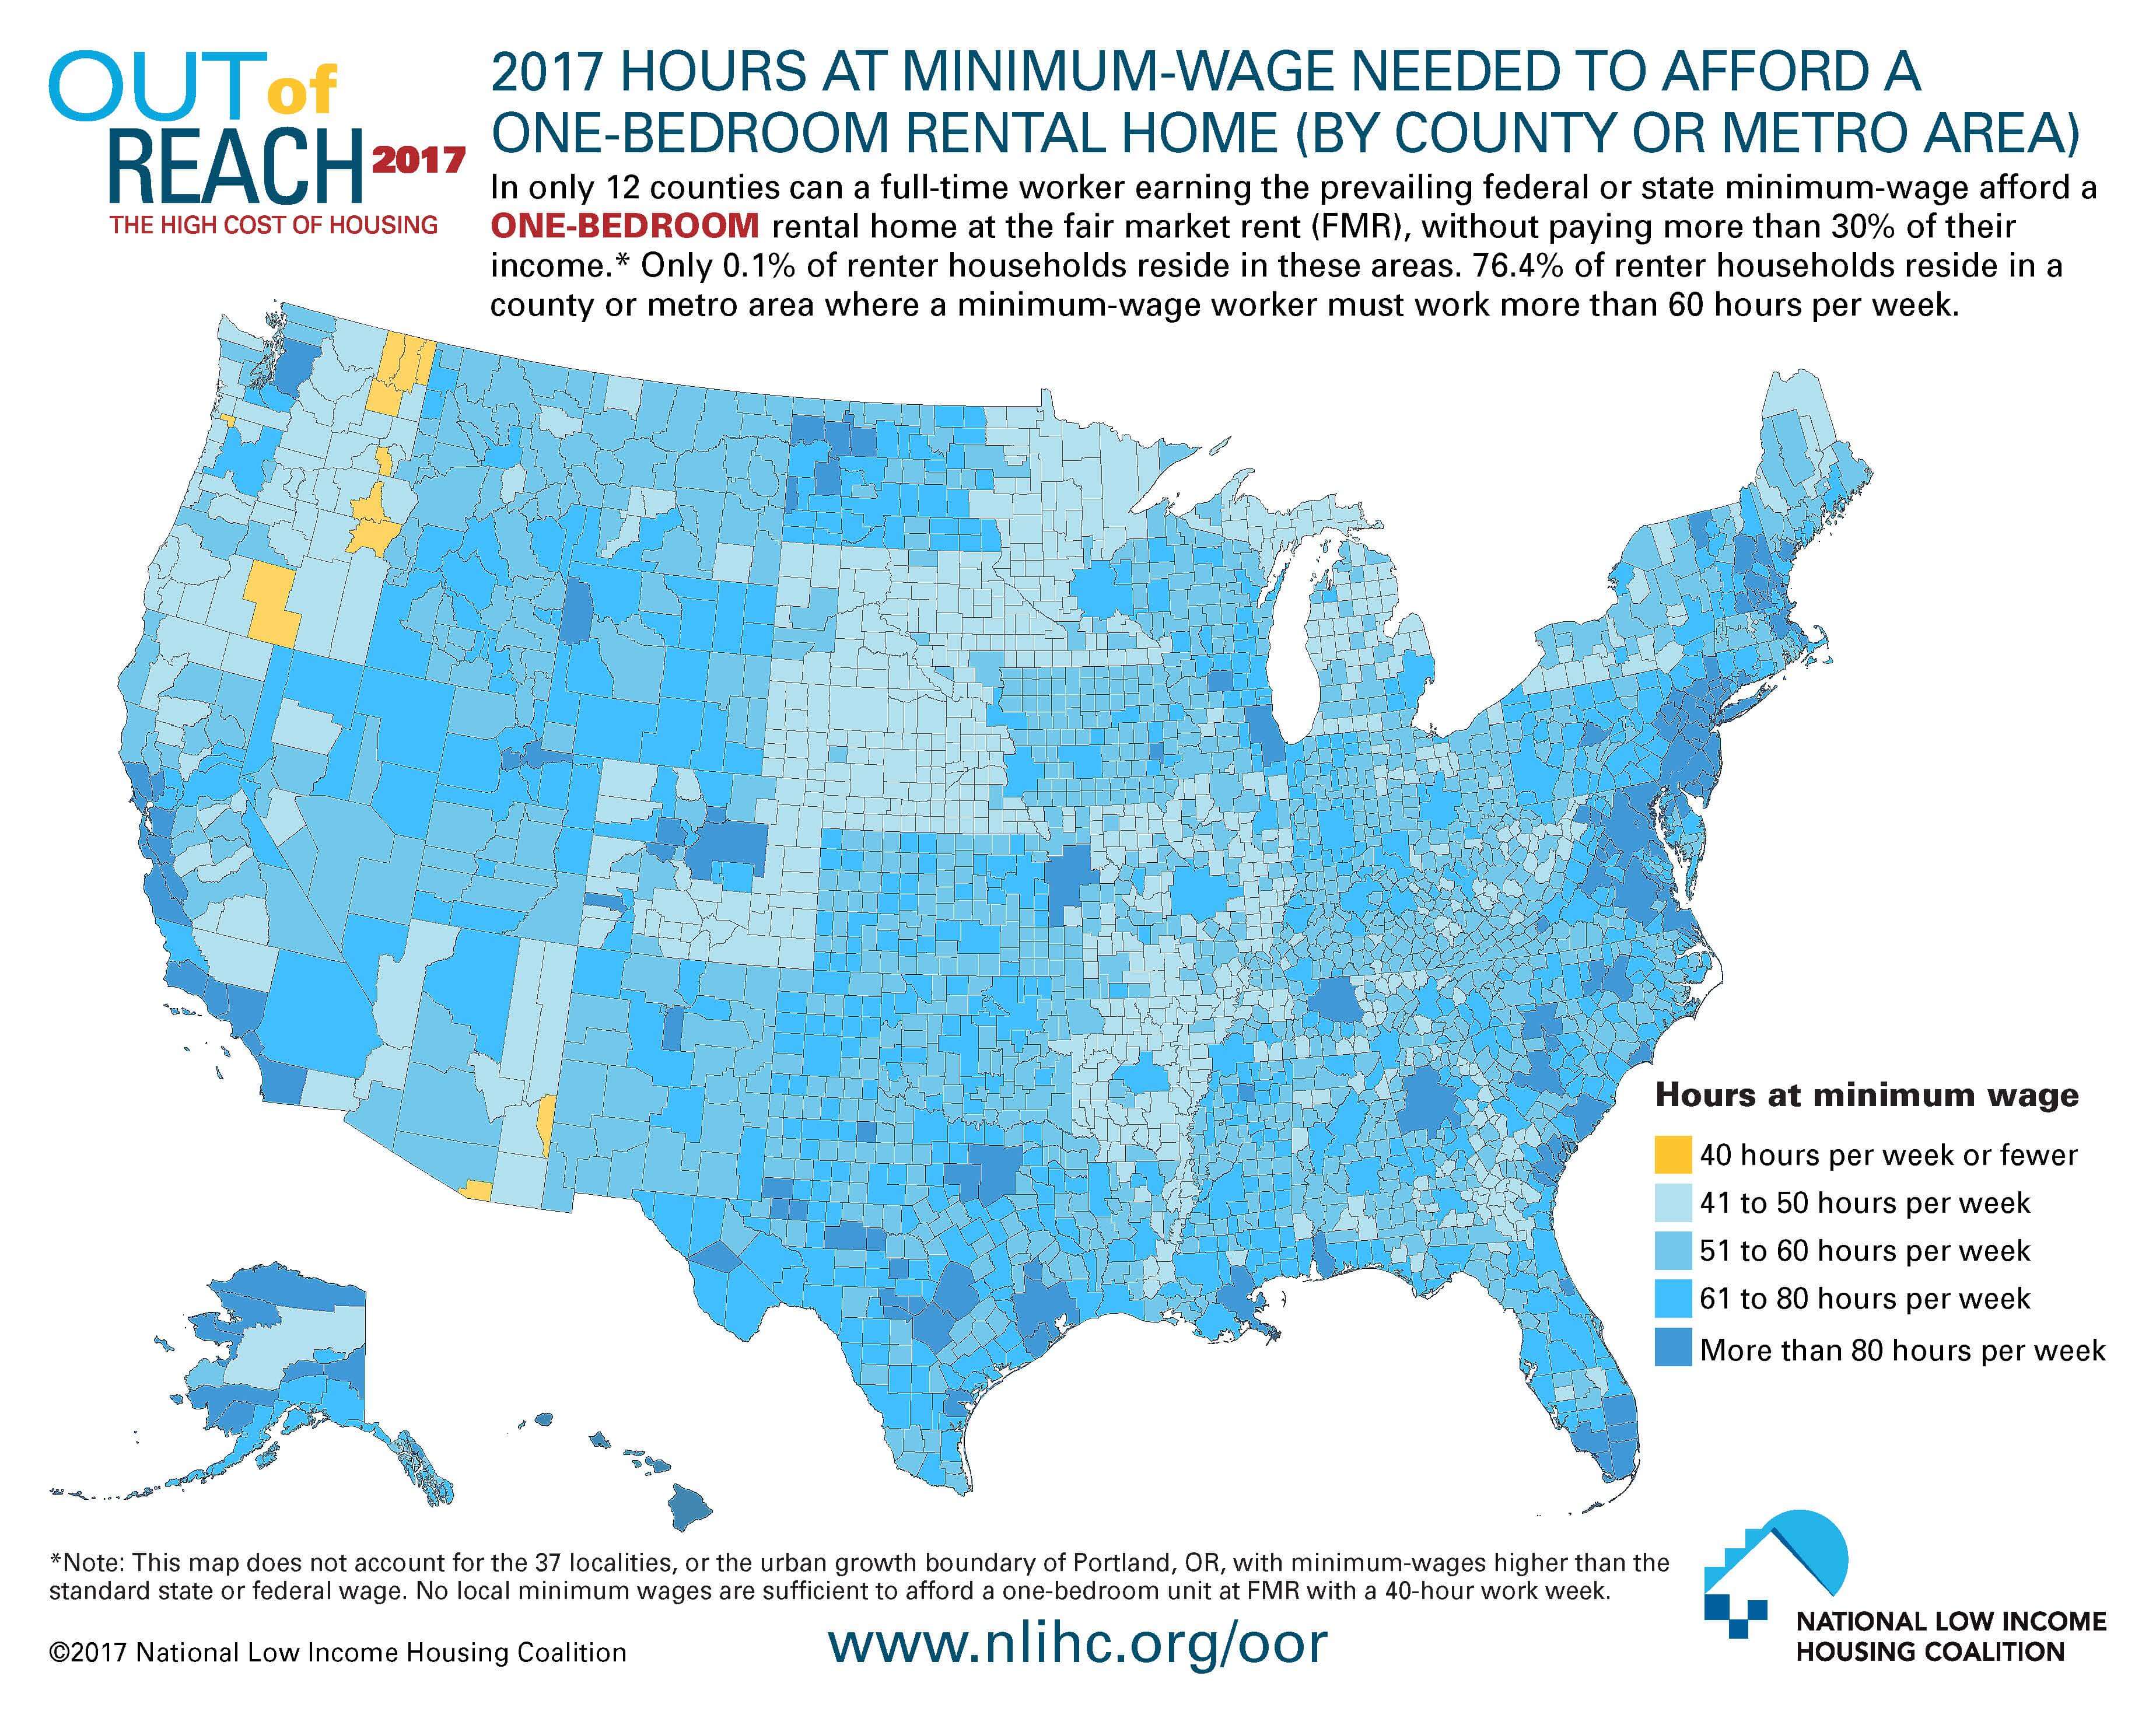 Out of Reach_2017_Min-Wage-Map_County-Metro.pdf